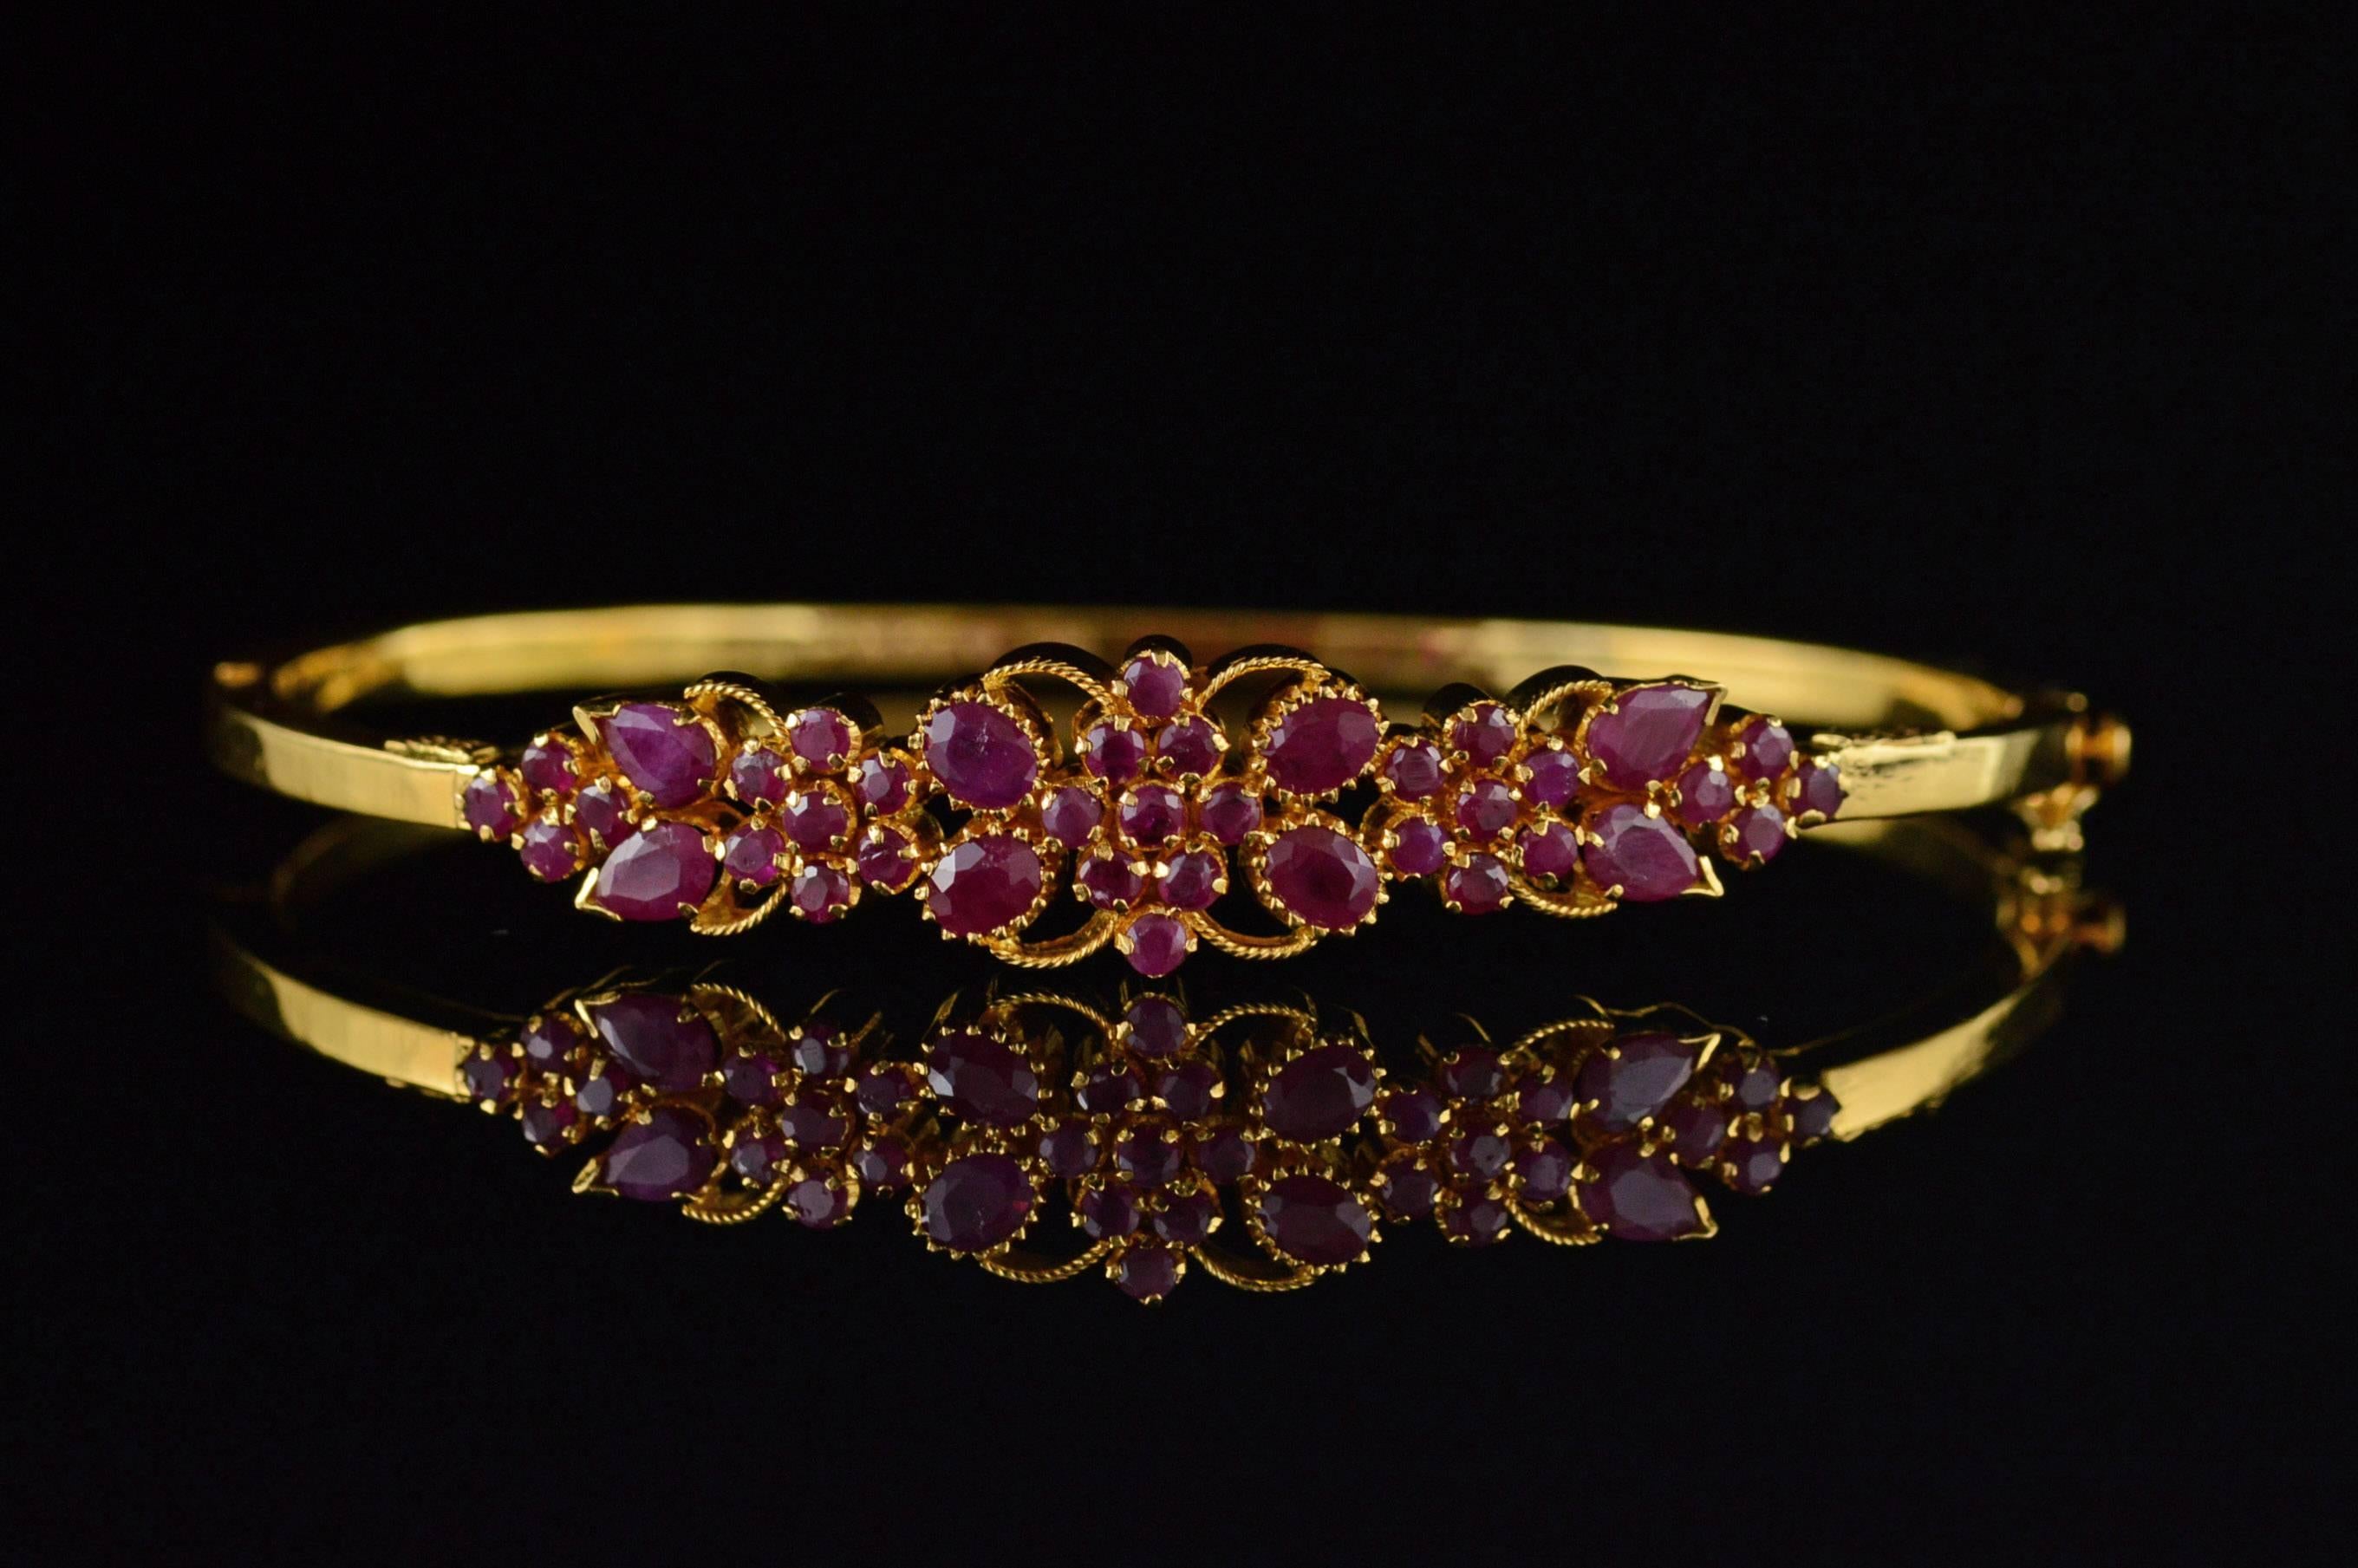 ·Item: 22K 2.75 CTW Ruby Cluster Filigree Bangle Bracelet 2.3" Yellow Gold

·Era: Modern / 2000s

·Composition: 22k Gold Marked / Tested

·Gem Stone: 39x Rubies=2.75ctw

·Weight: 15.7g